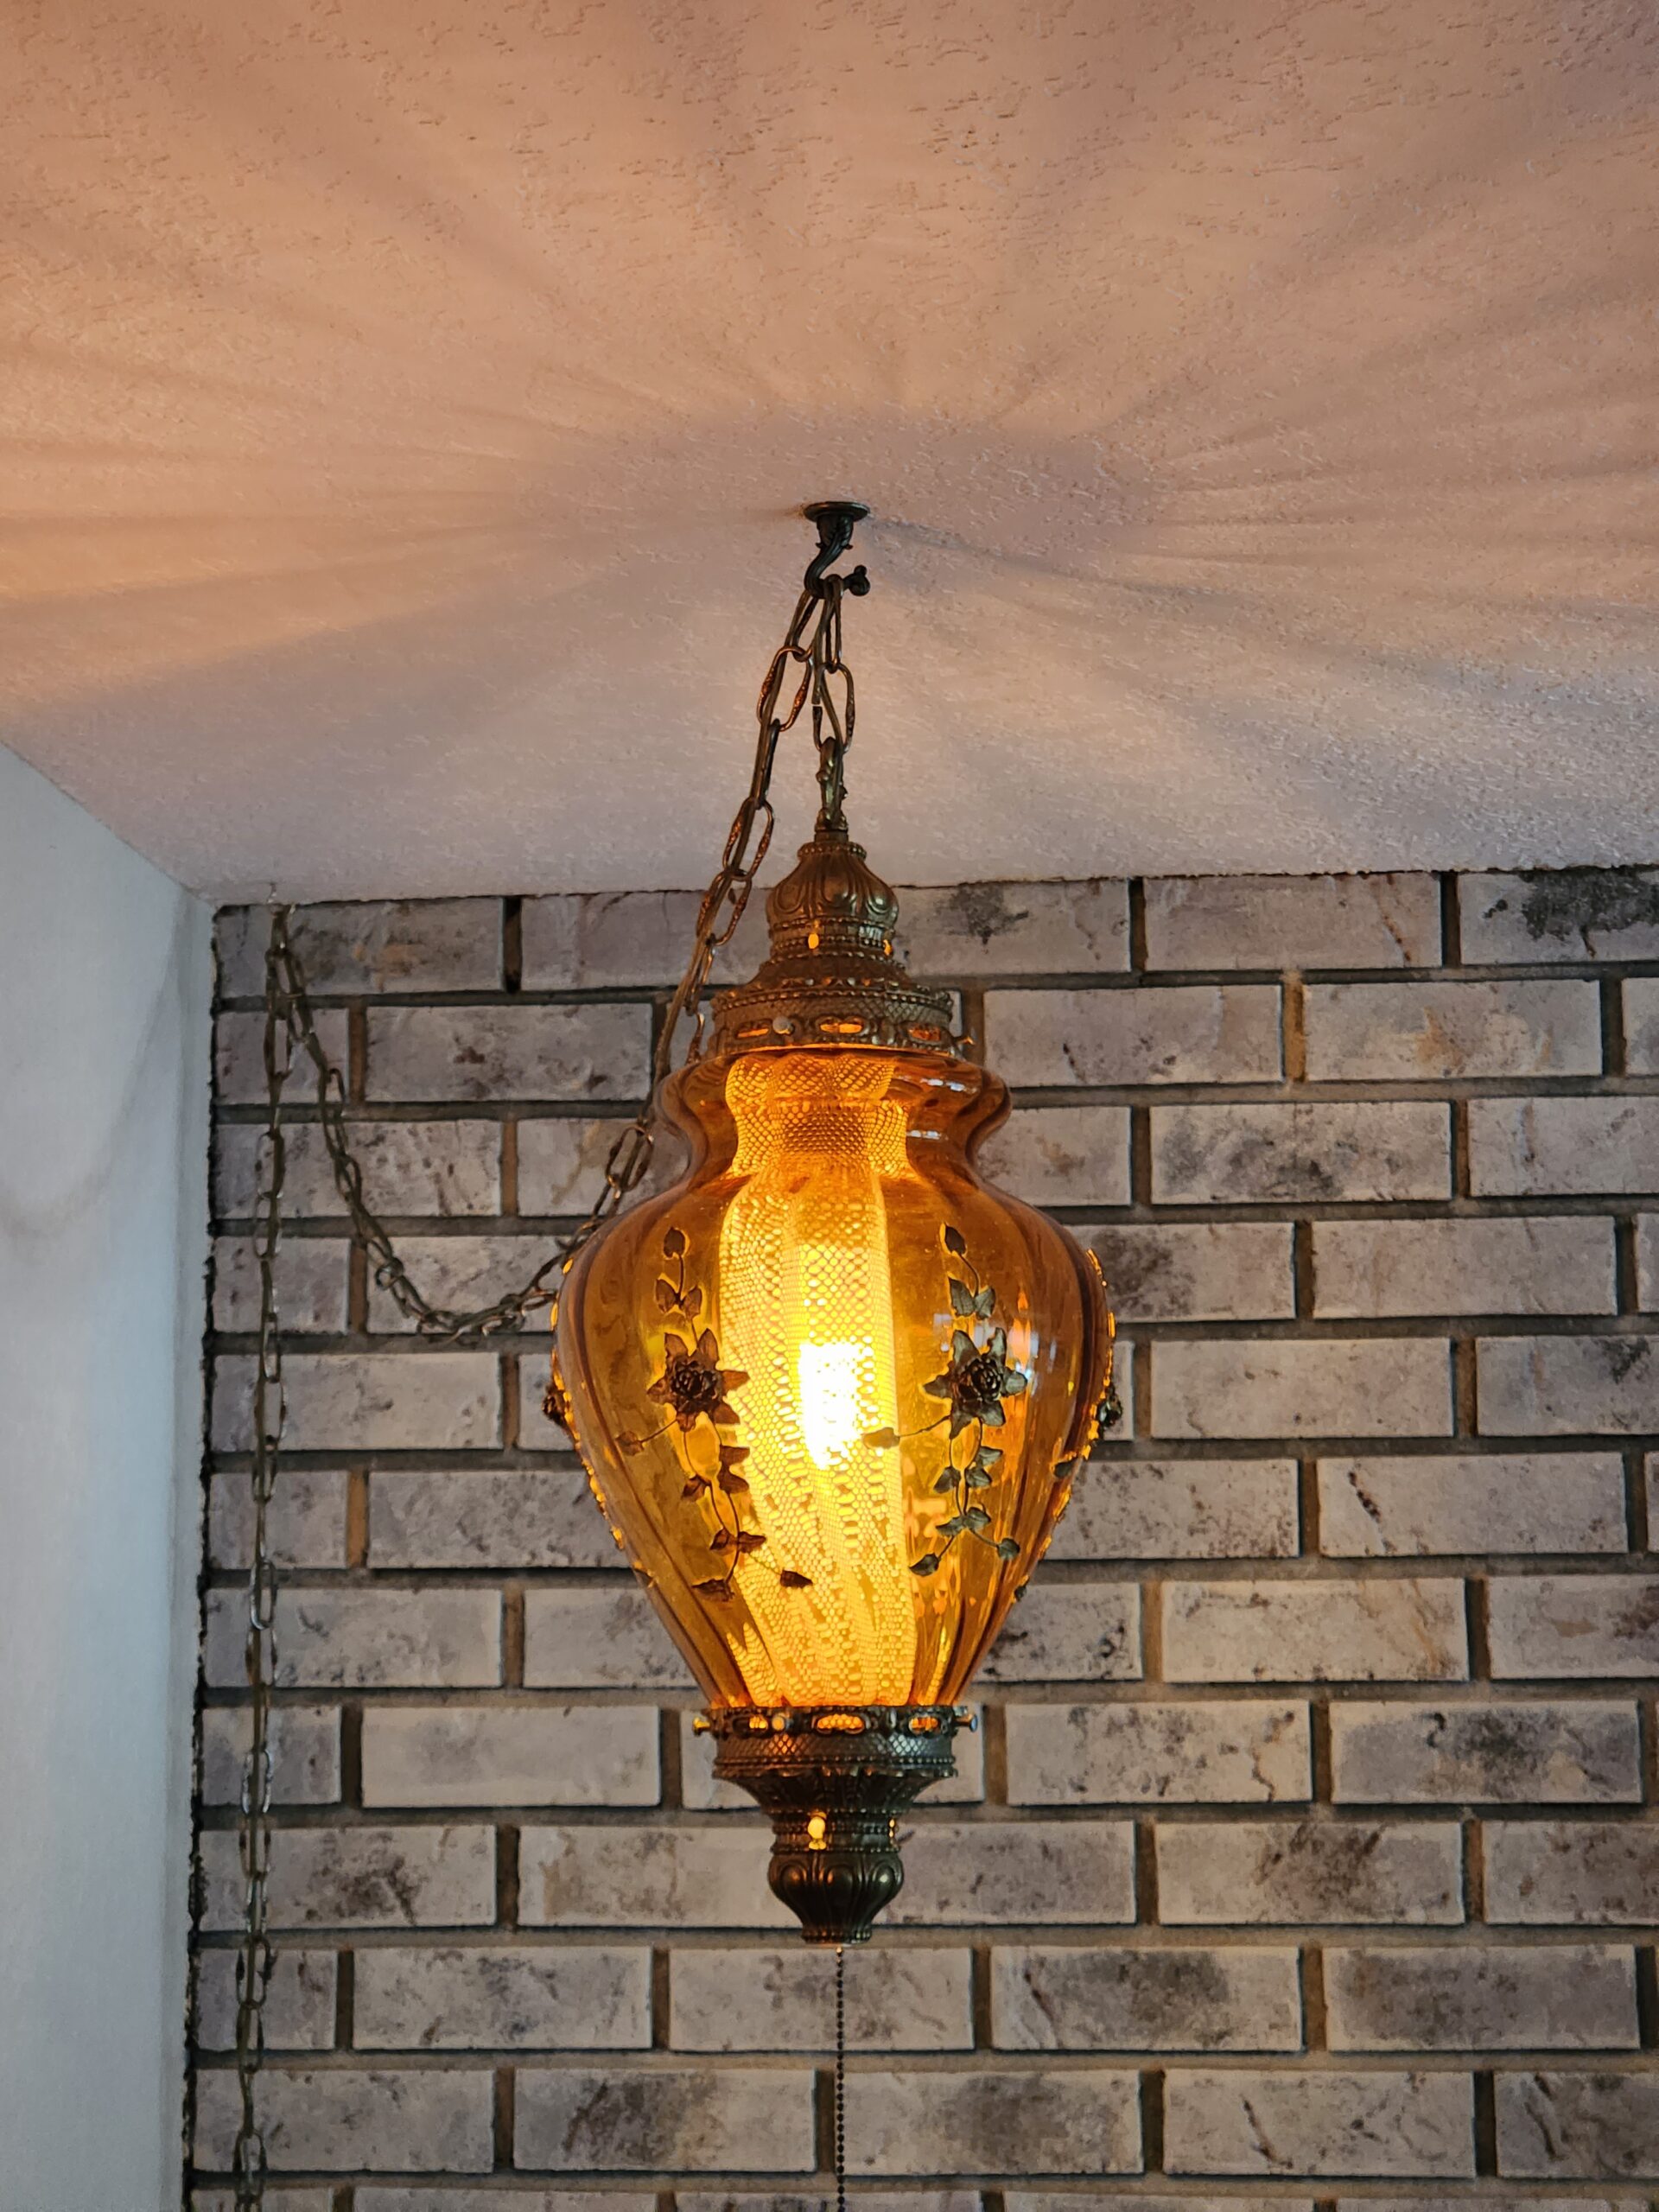 An amber glass vase shaped lamp hangs from the ceiling. It has an ornate brass top and bottom, and golden flowers and vines on the glass. 